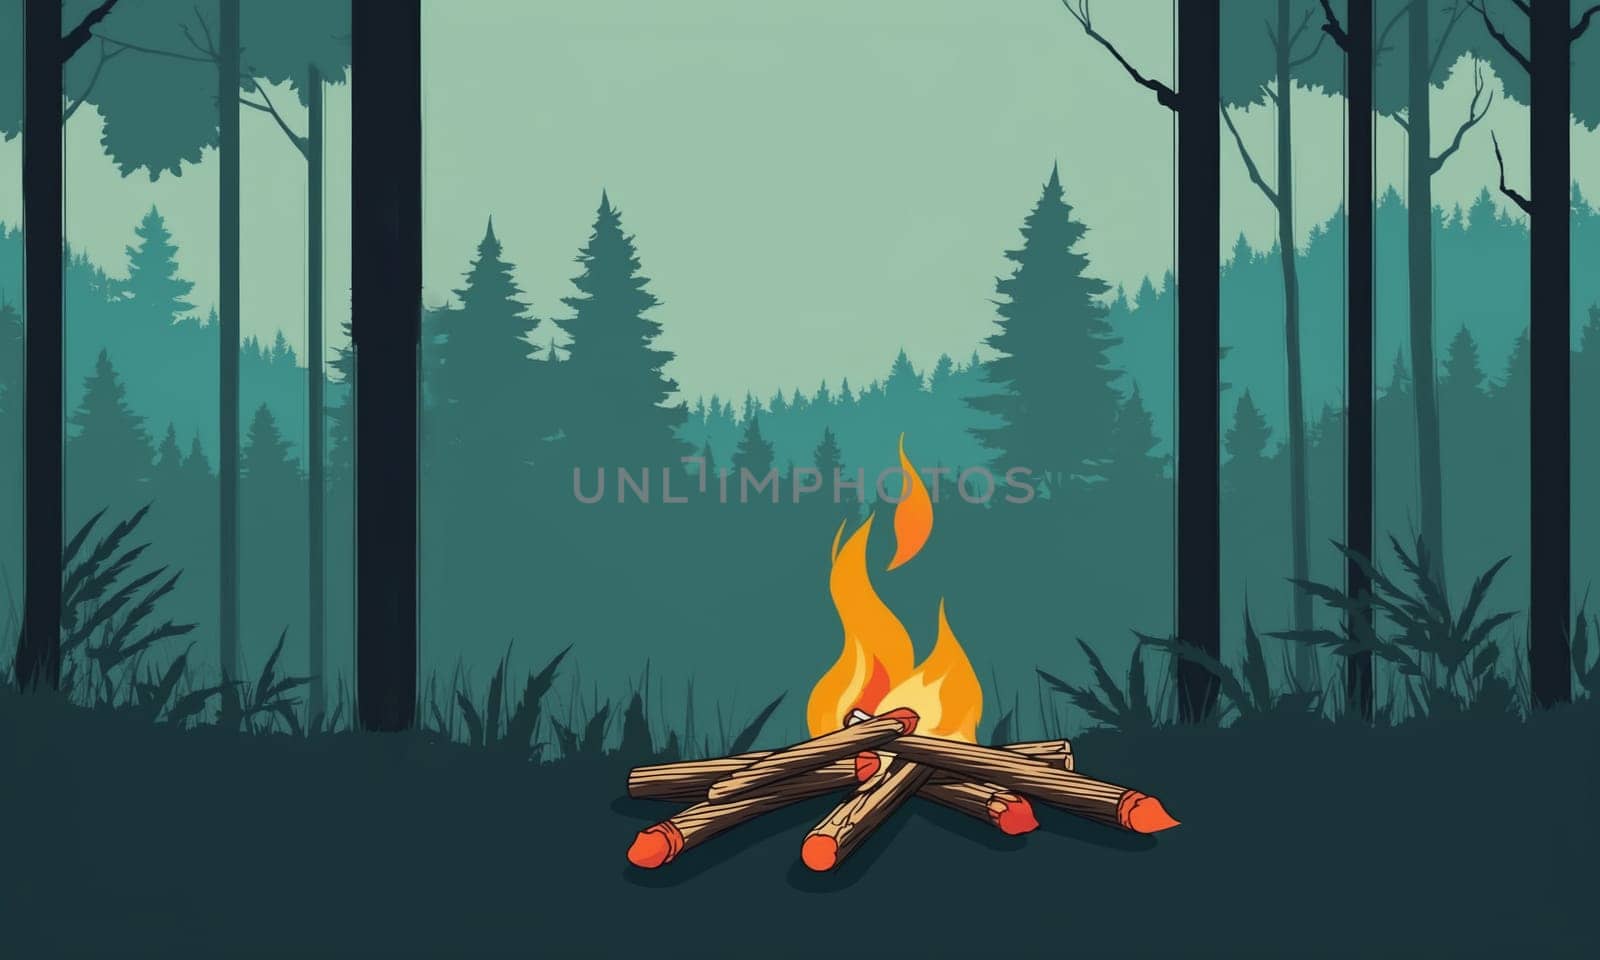 Burning bonfire in the forest. Flat style illustration